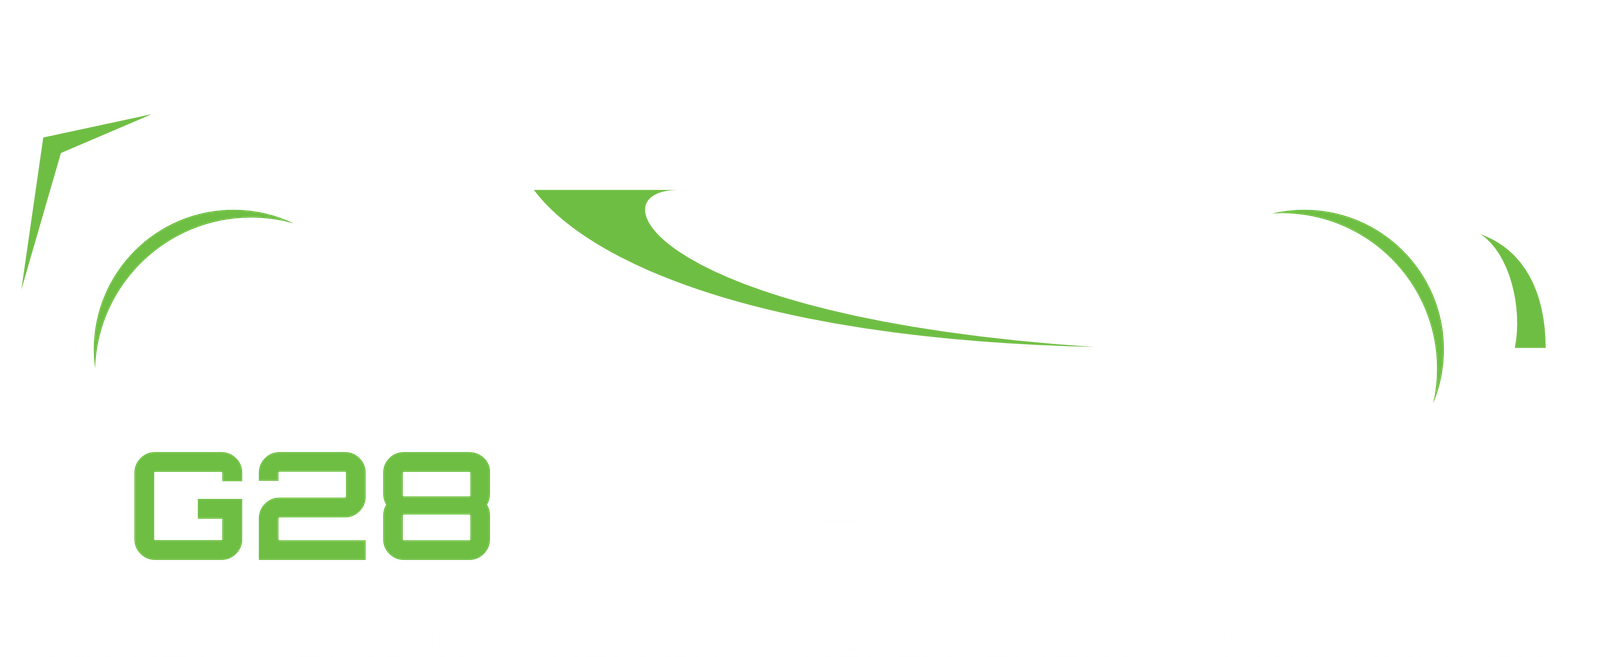 Car Key Repair Near Me Explained In Fewer Than 140 Characters